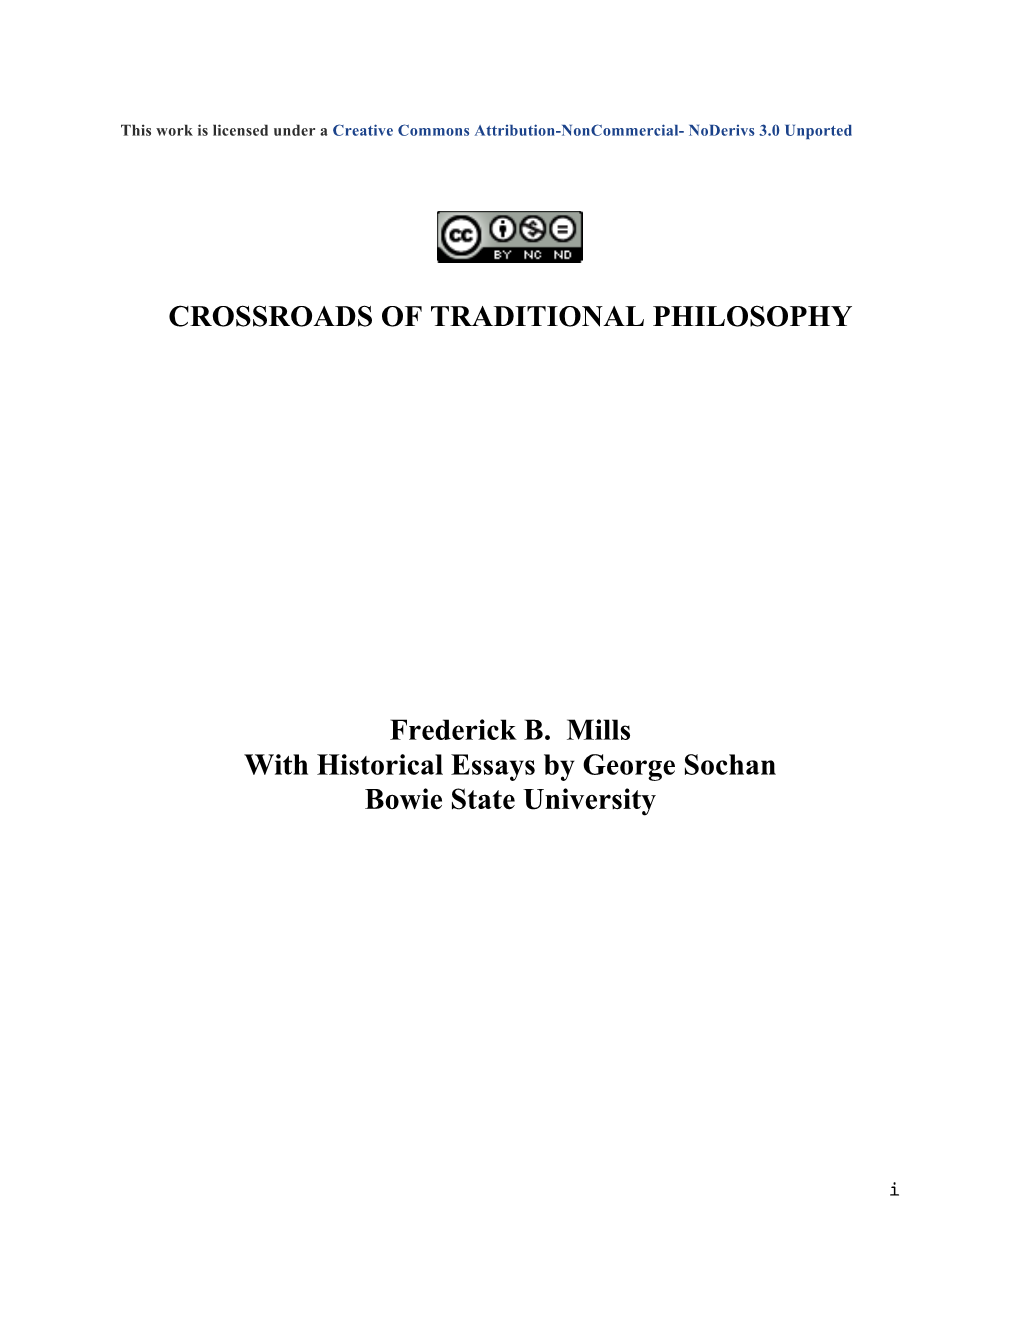 CROSSROADS of TRADITIONAL PHILOSOPHY Frederick B. Mills with Historical Essays by George Sochan Bowie State University